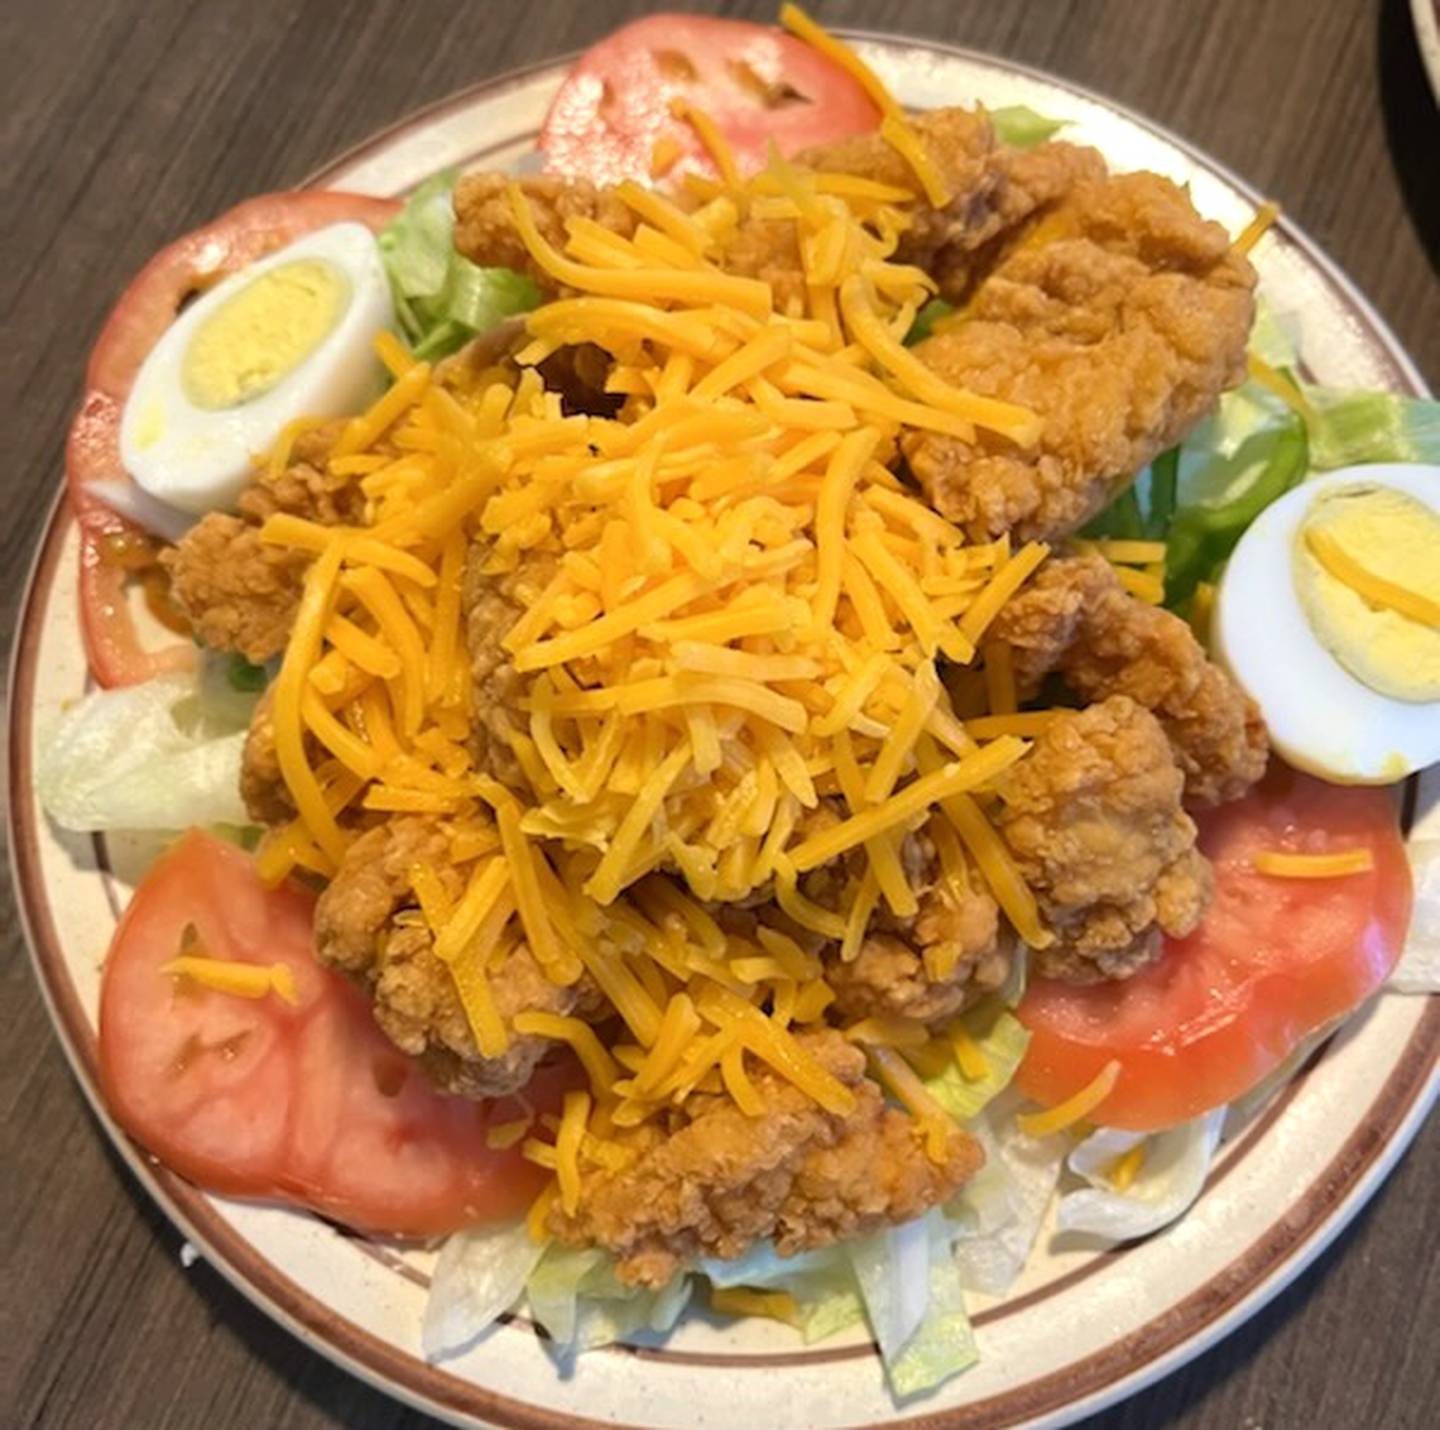 The popcorn chicken salad at the Coffee Cup is a large plate of lettuce topped with fried chicken, tomatoes, hard boiled eggs, shredded cheese and choice of dressing.